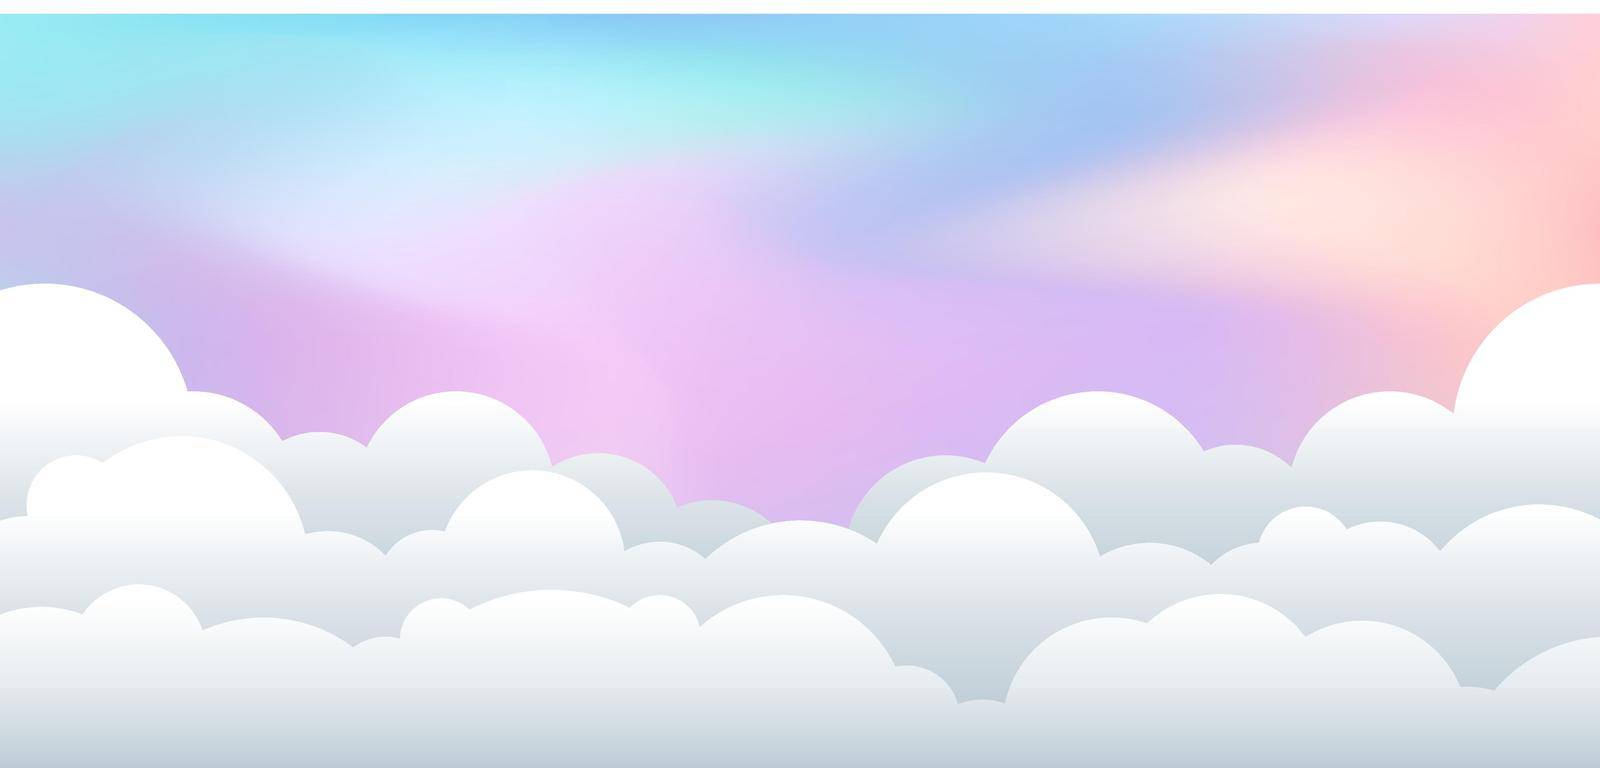 Landscape with cloudy paper cut Illustration style pastel background. Vector illustration